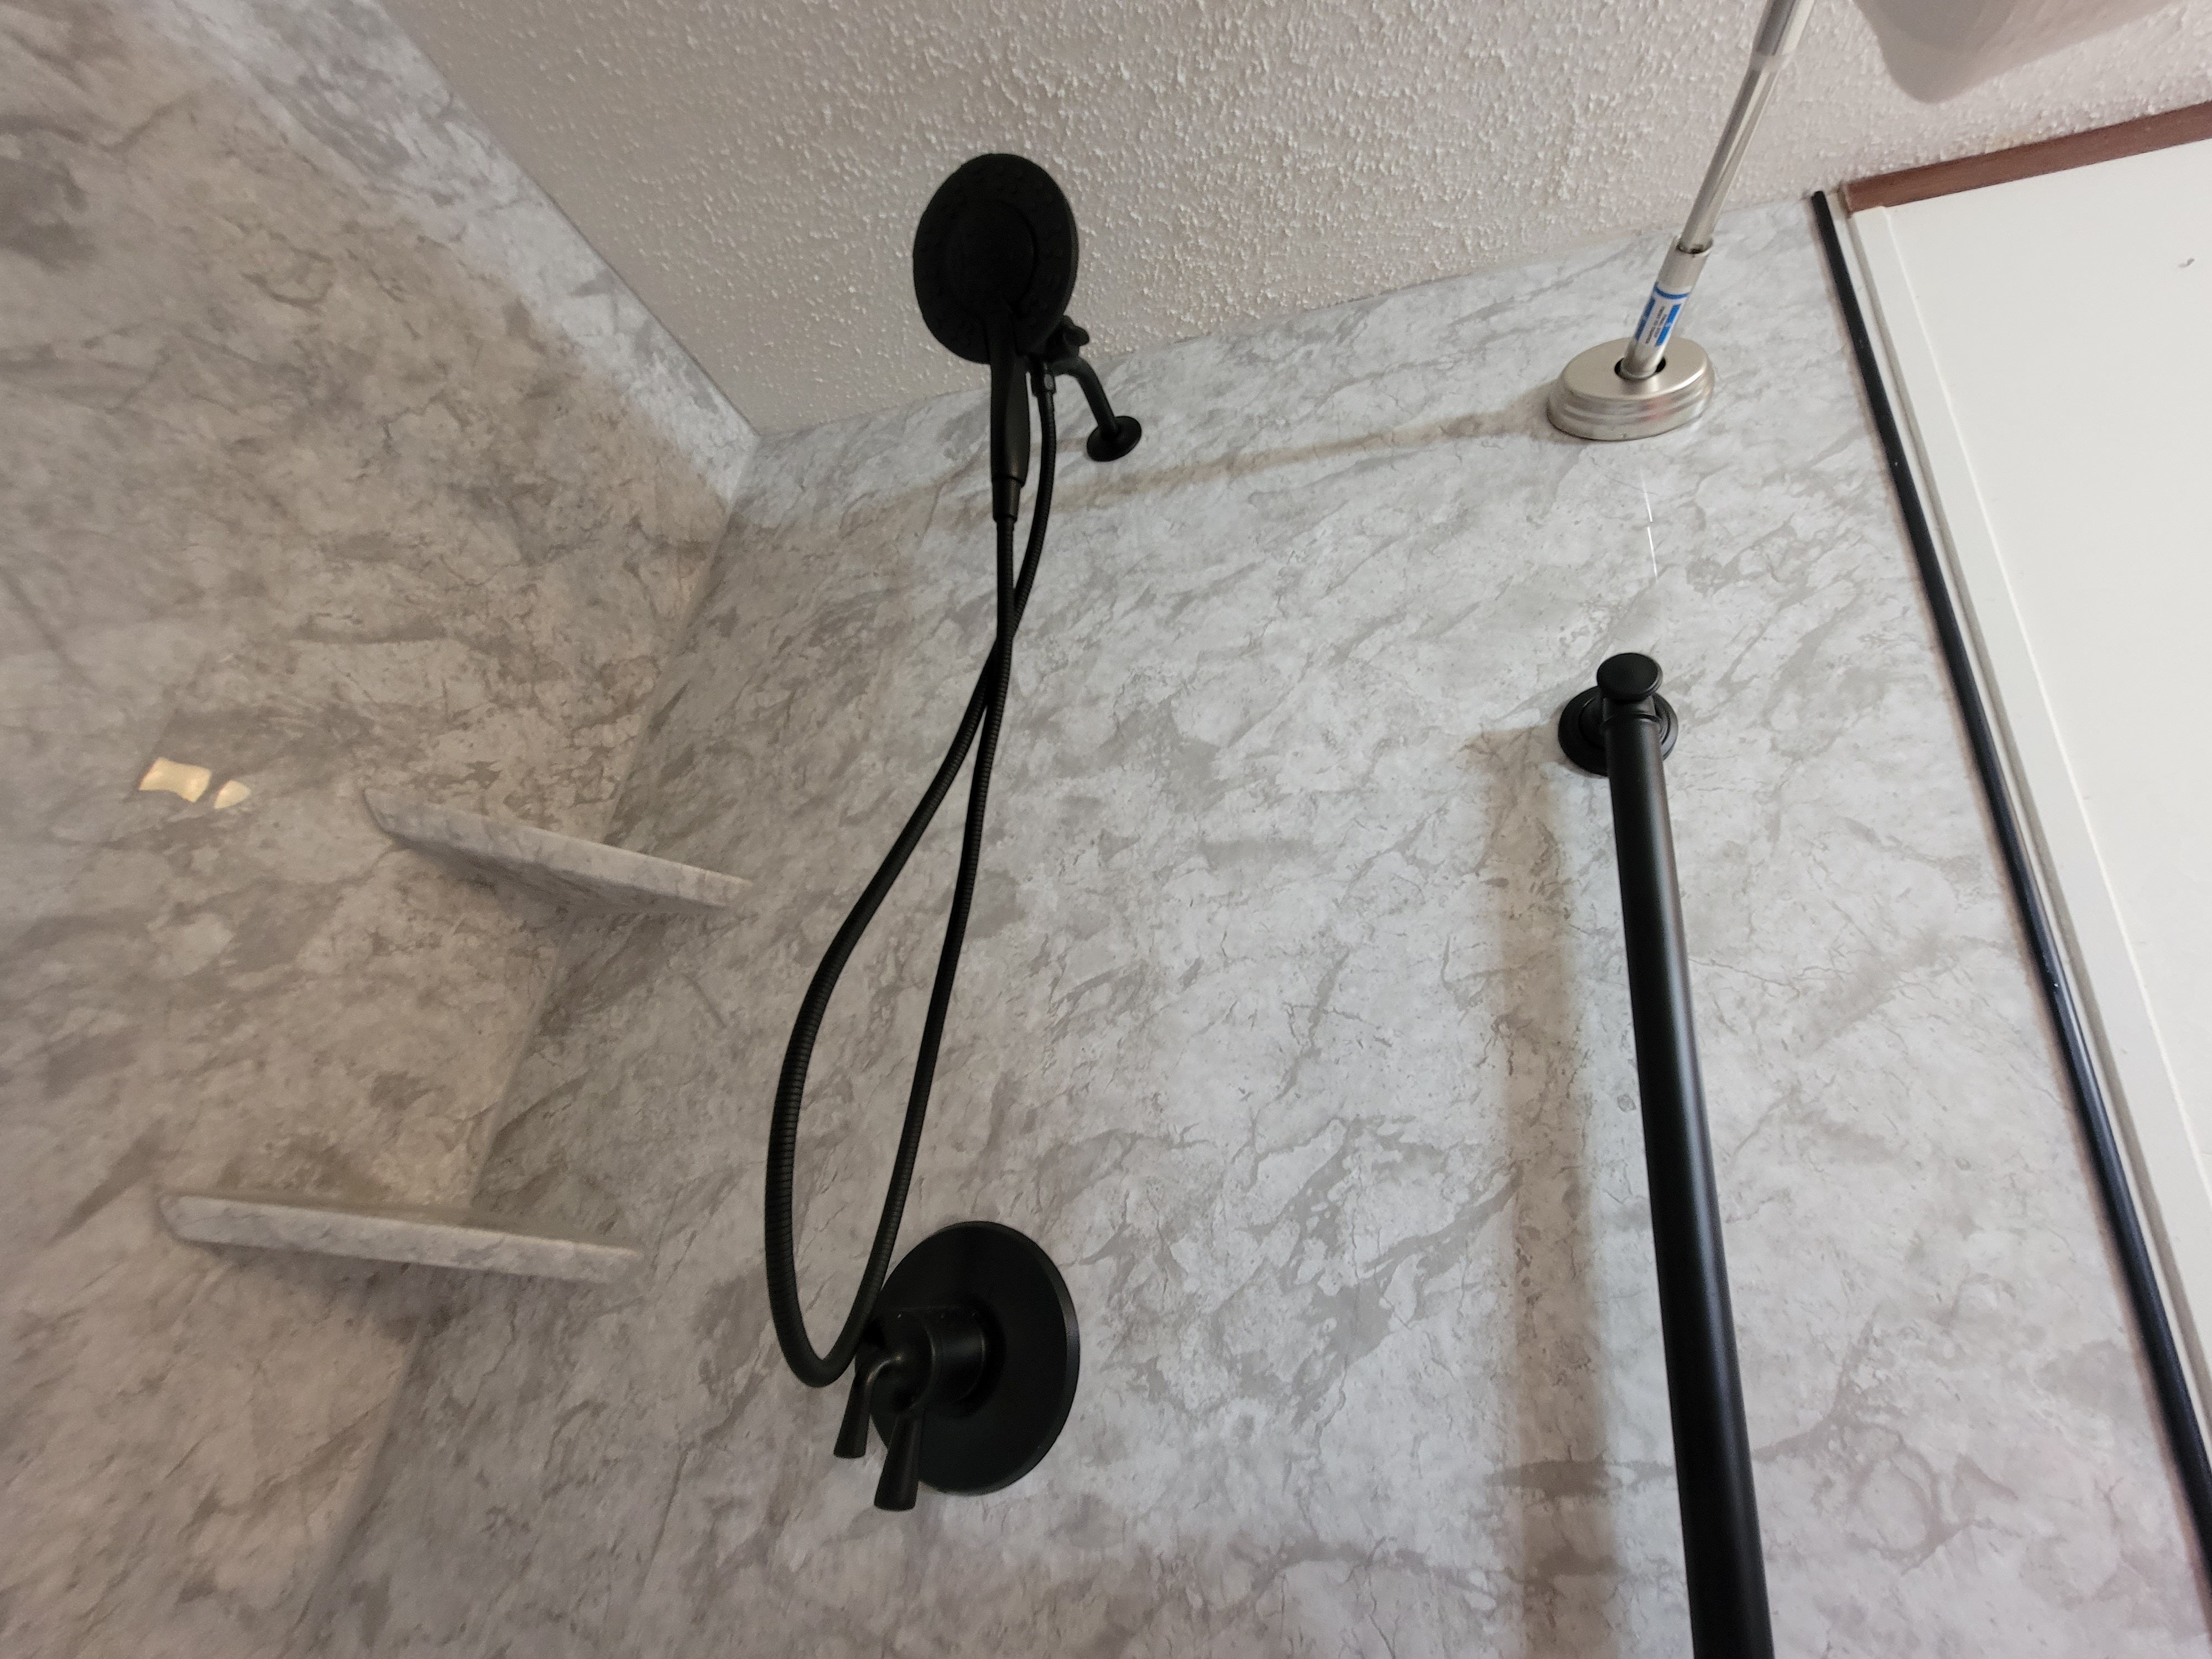 New gray marble walls and black shower head